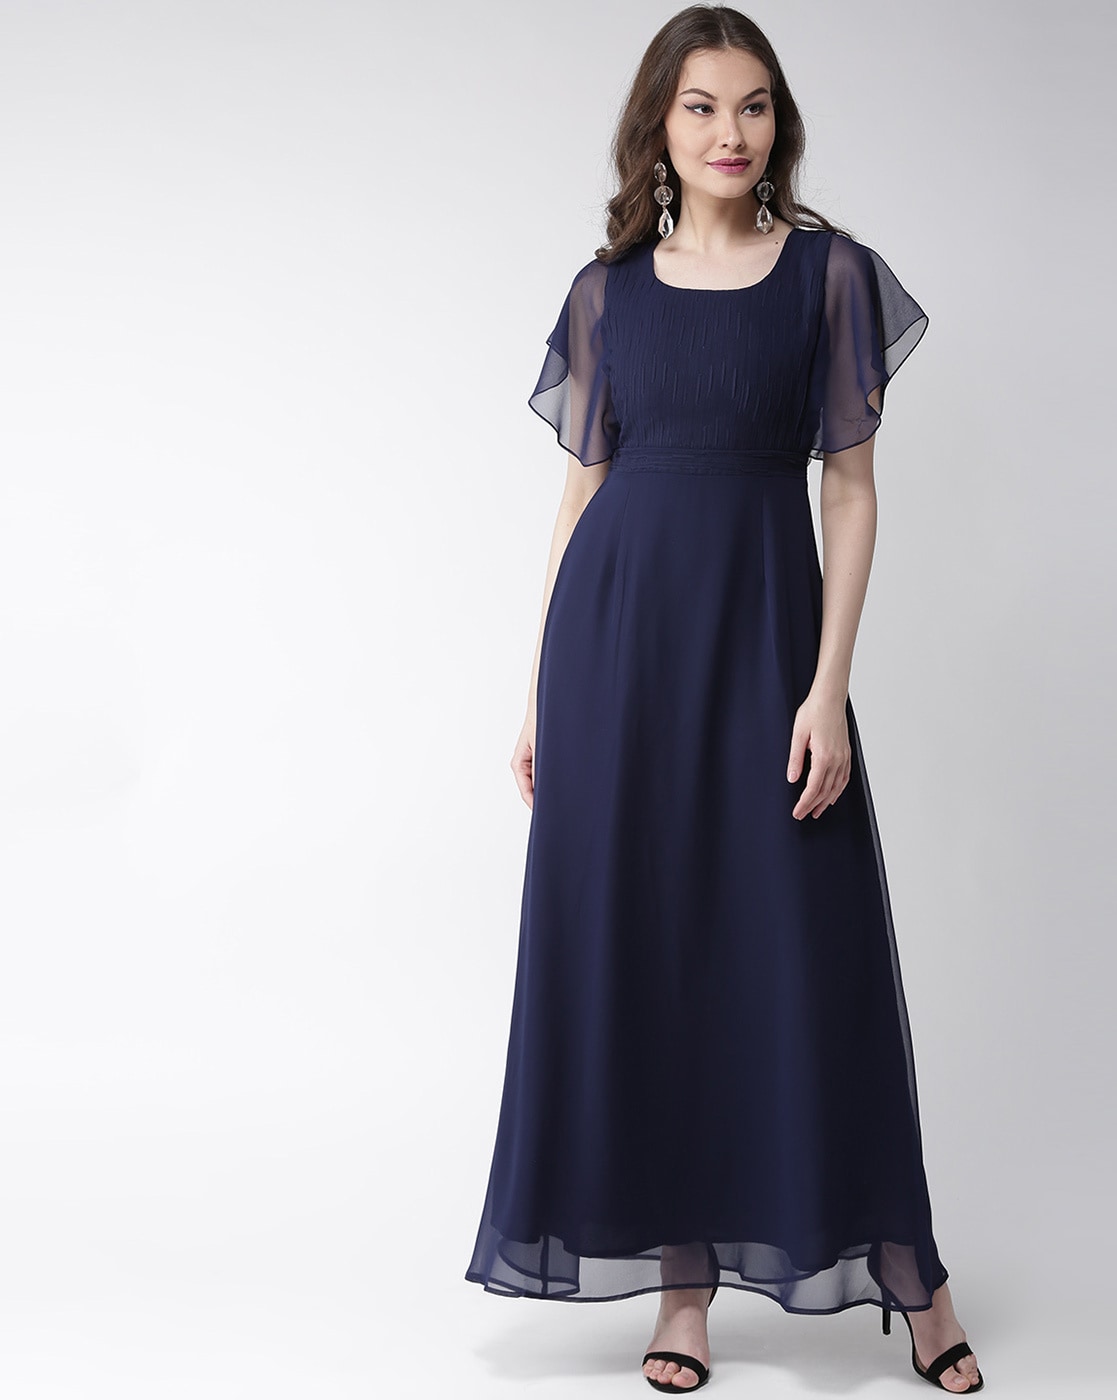 Buy Navy Blue Dresses for Women by Mish ...